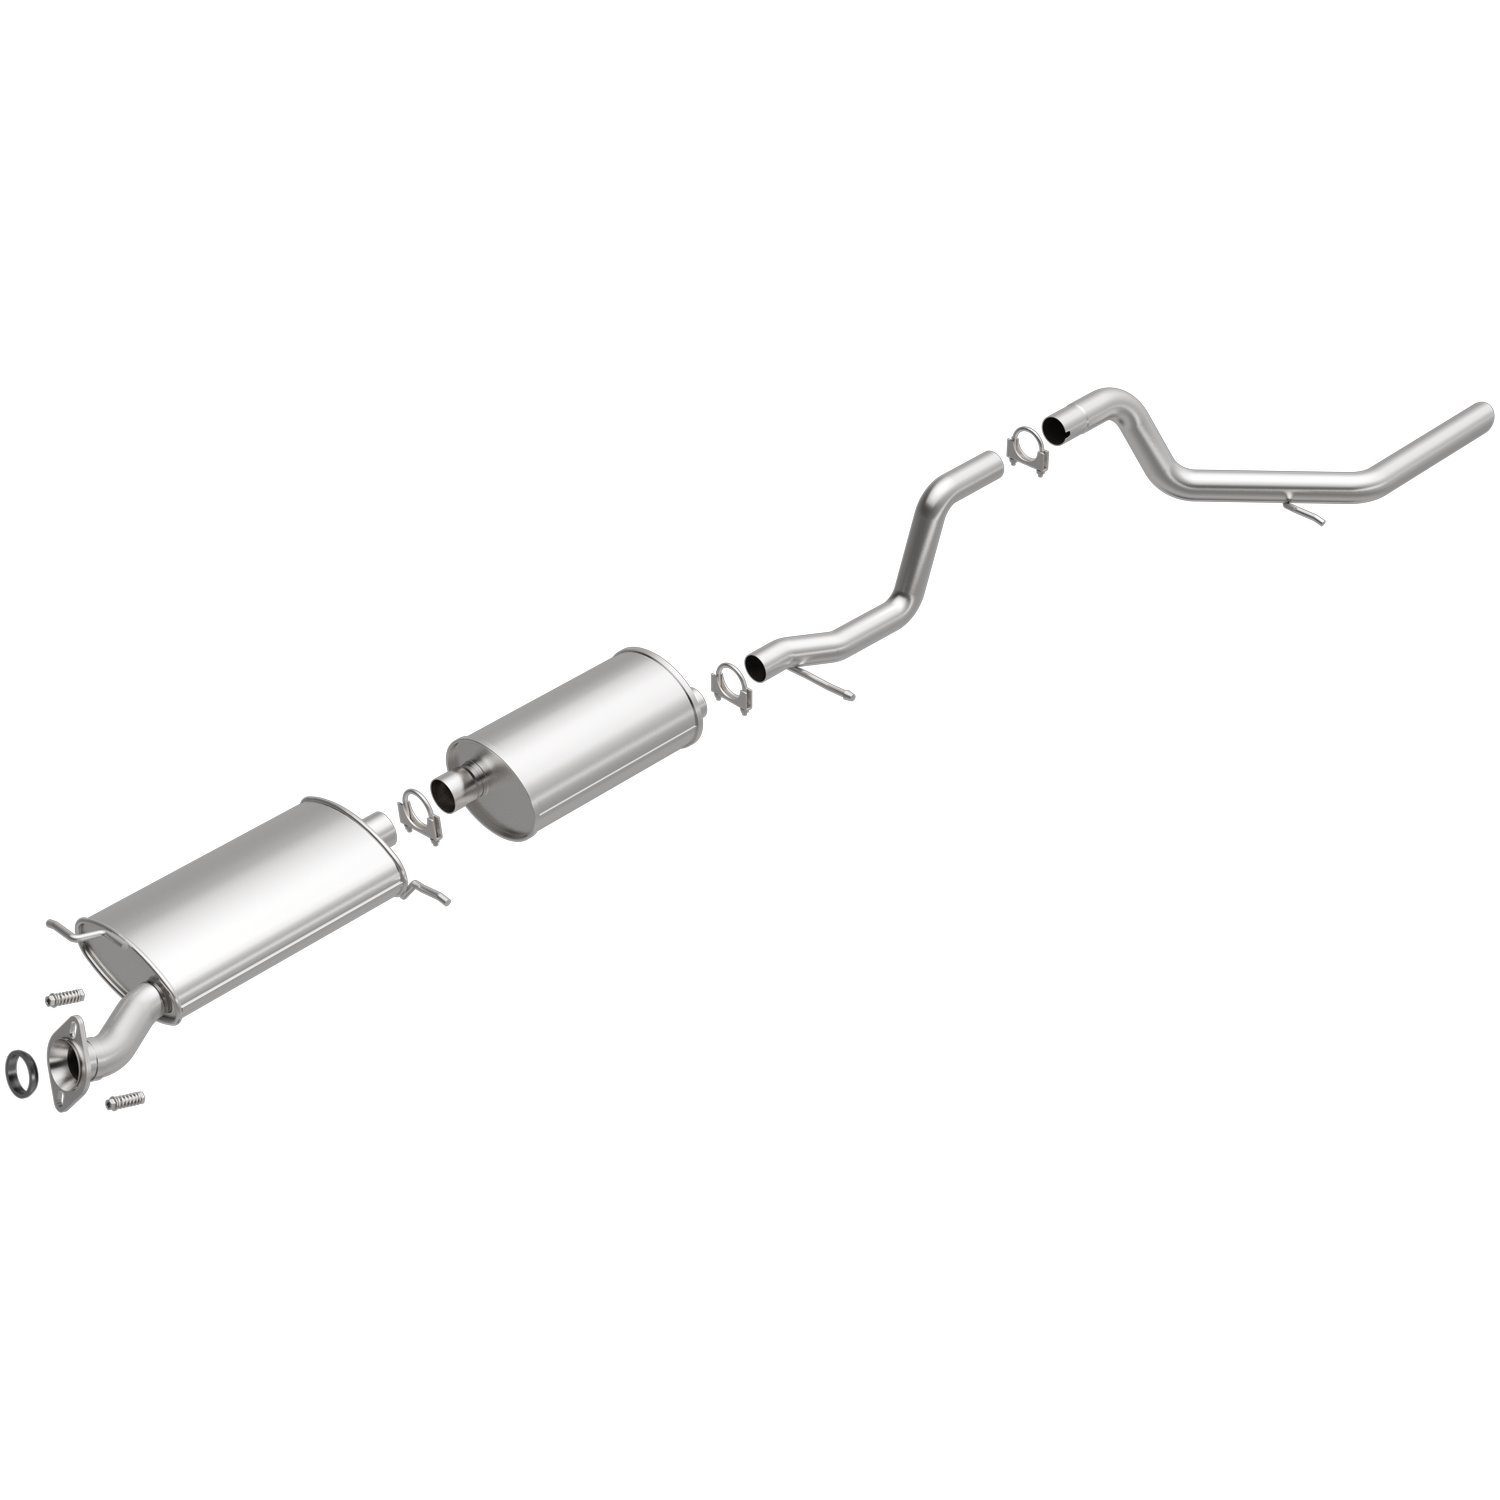 Direct-Fit Exhaust Kit, 2006-2010 Ford Explorer Sport Trac, Mercury Mountainer 4.6L